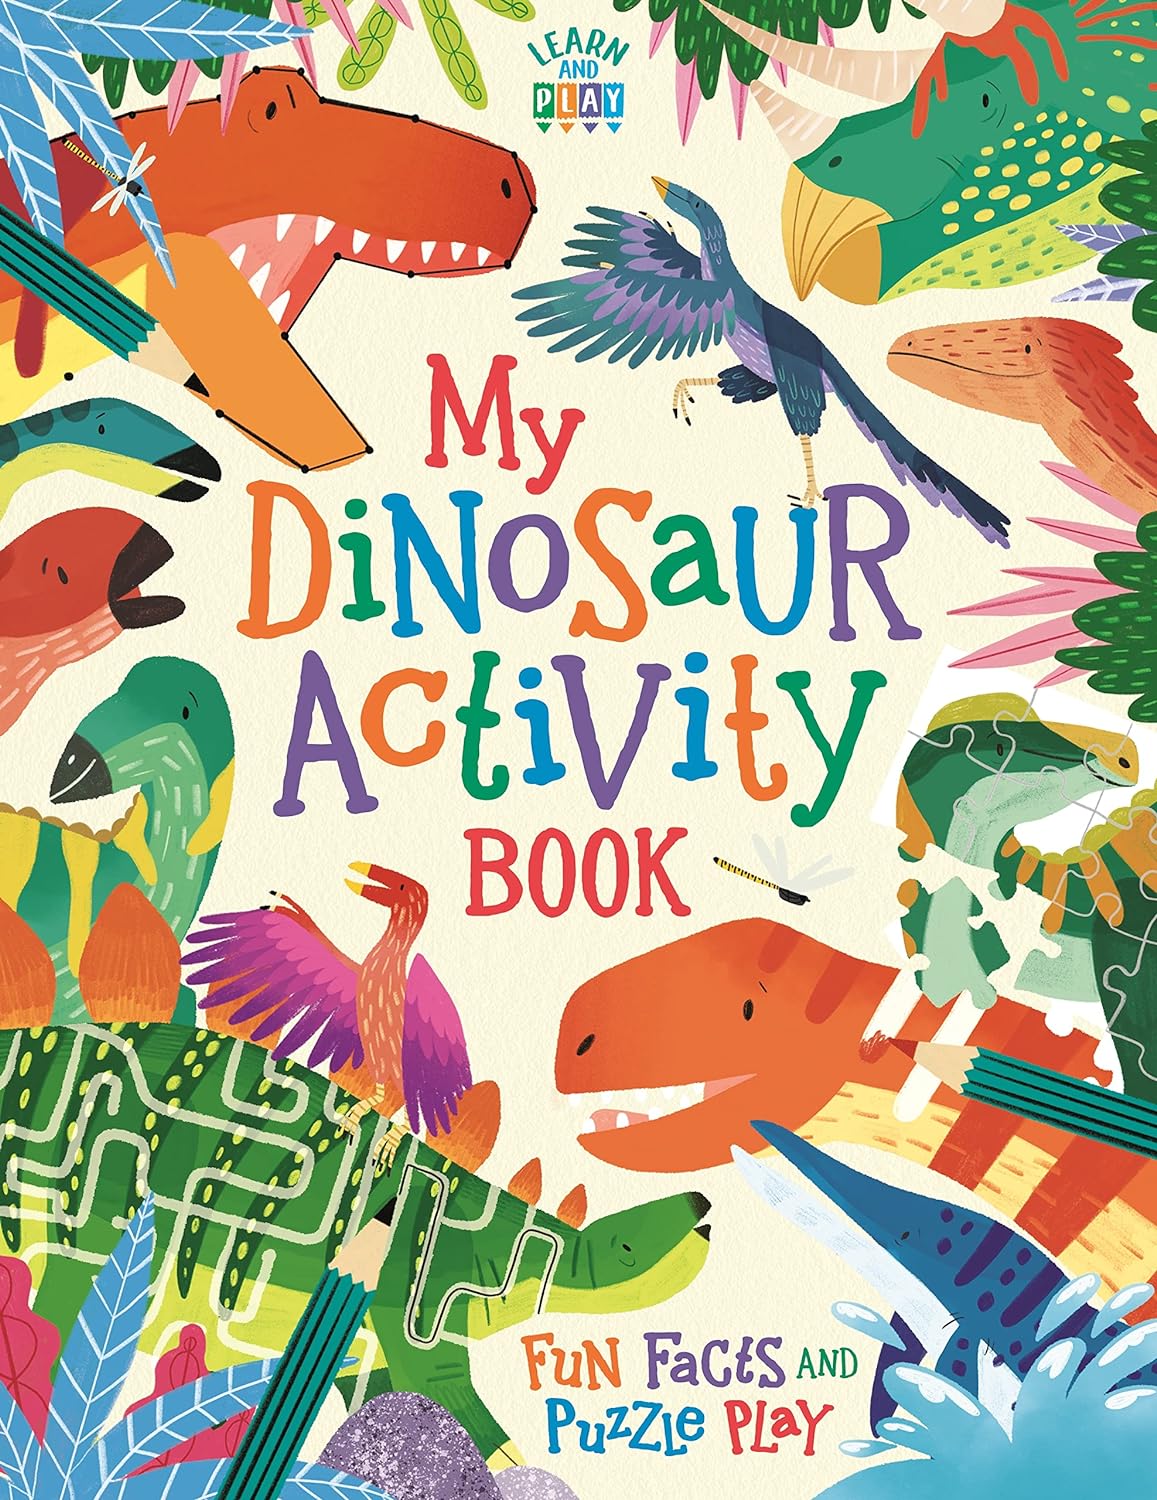 My Dinosaur Activity Book: Fun Facts and Puzzle Play (Learn and Play) Paperback